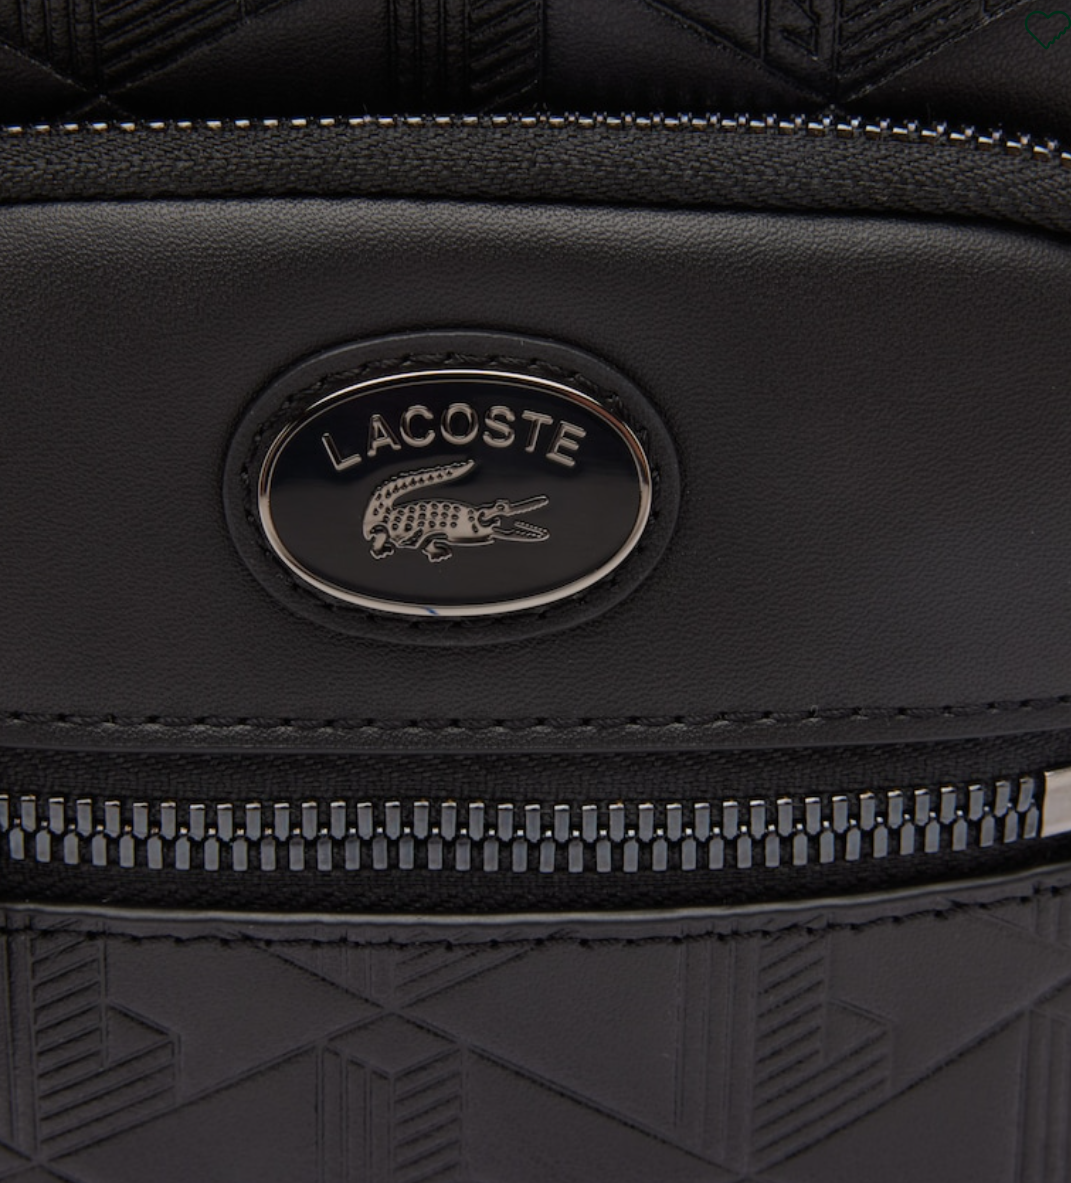 Lacoste Leather Monogram Print Crossover Bag